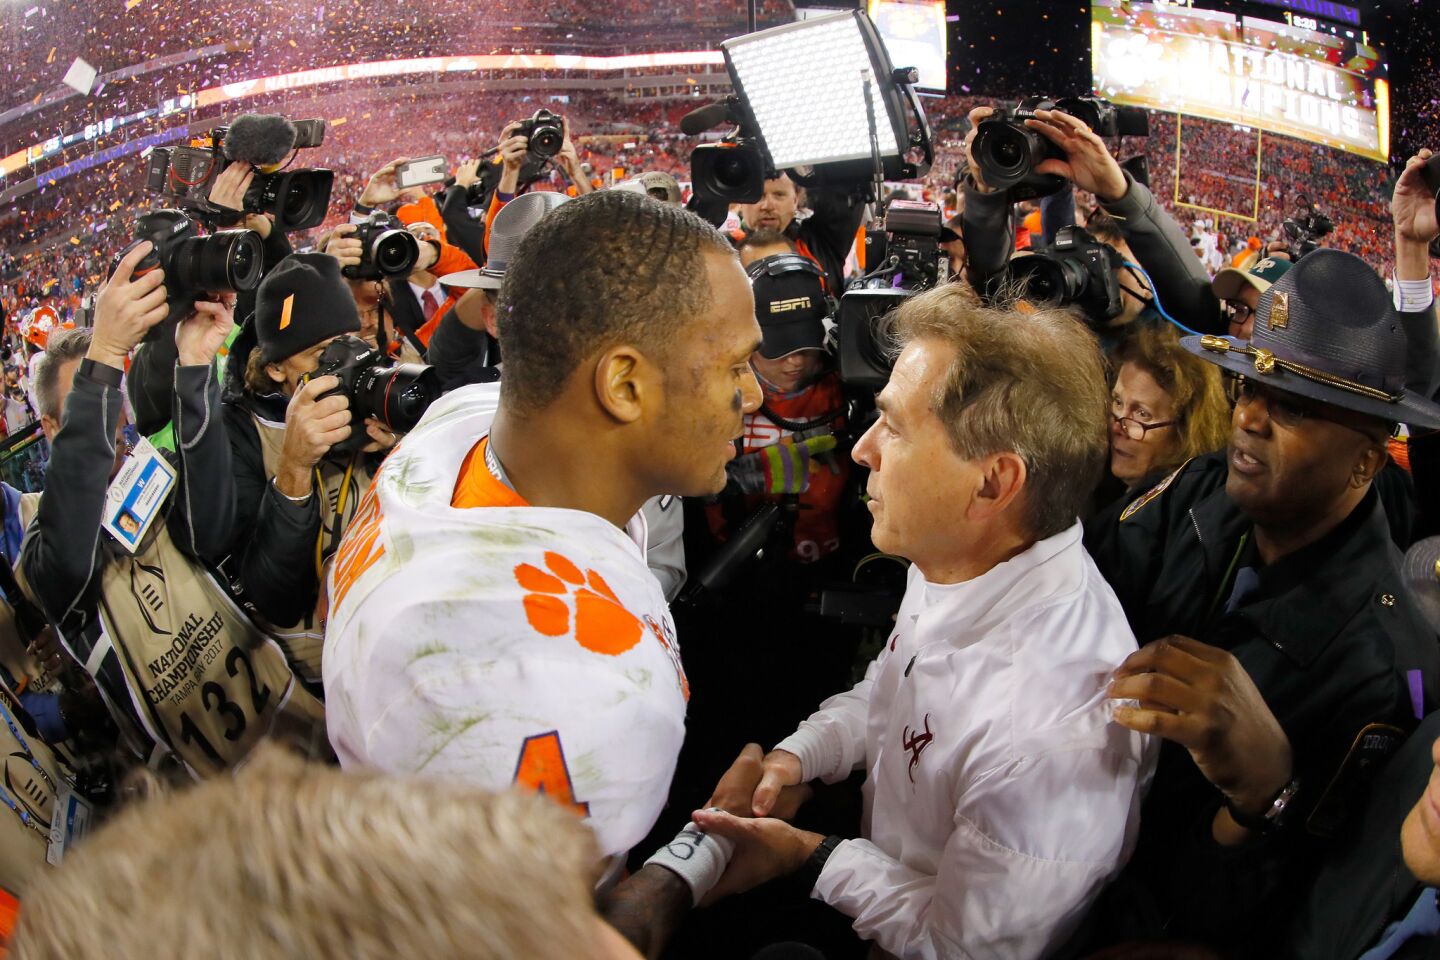 Clemson quarterback Deshaun Watson is congratulated by Alabama Coach Nick Saban after the Tigers' 35-31 victory over the Crimson Tide.